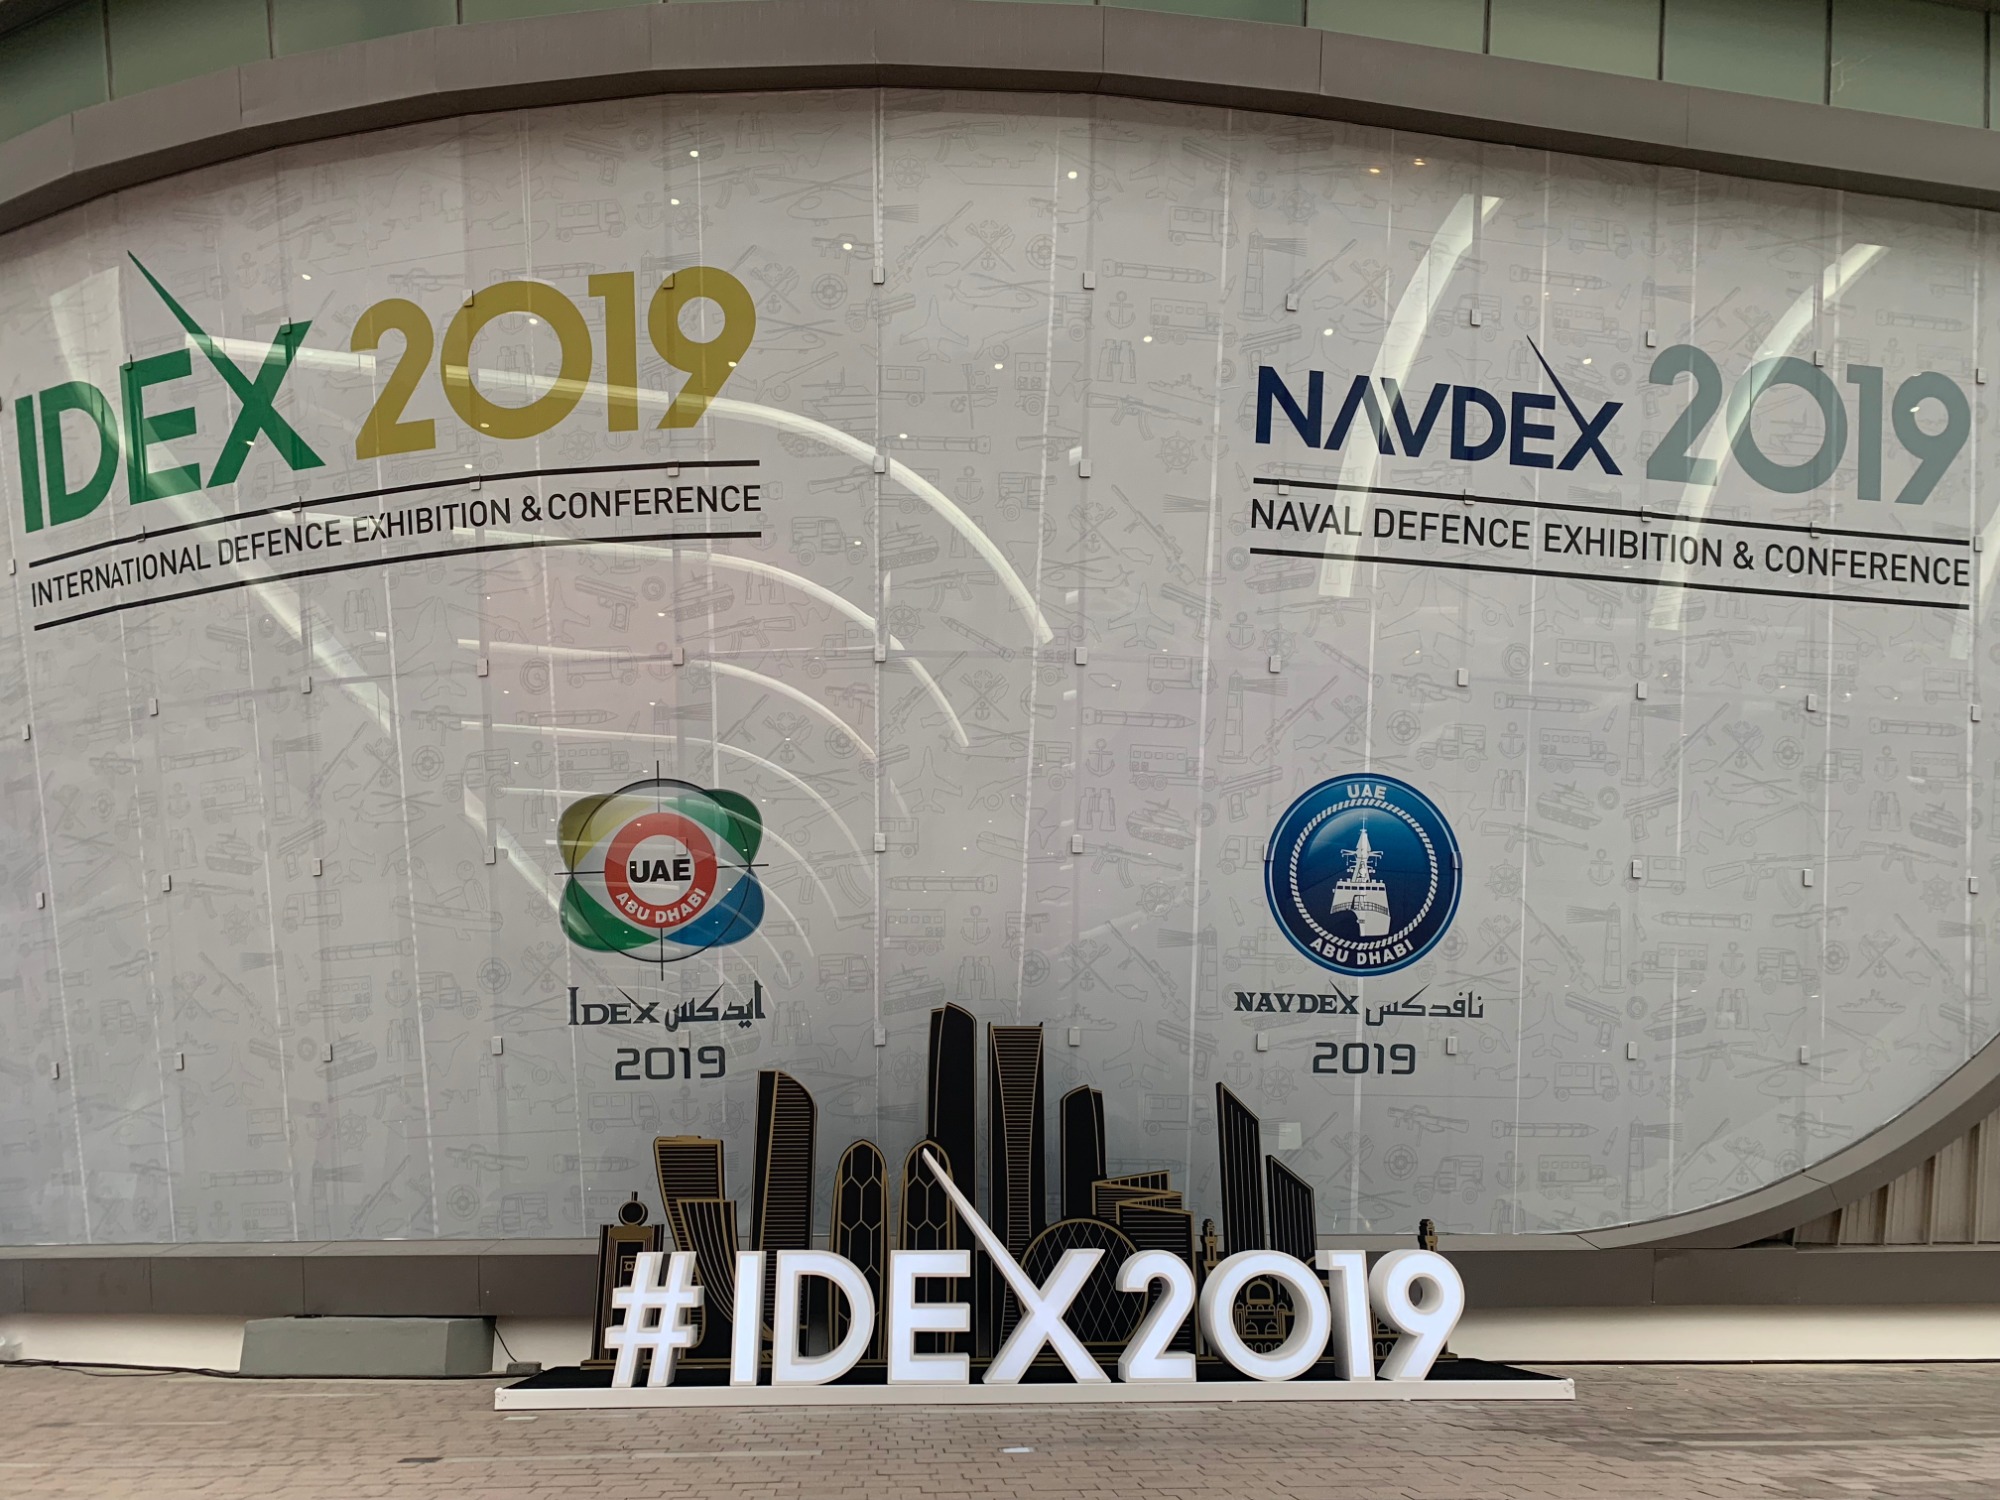 2019 The 14th International Defense Exibition & Conference阿布扎比展会